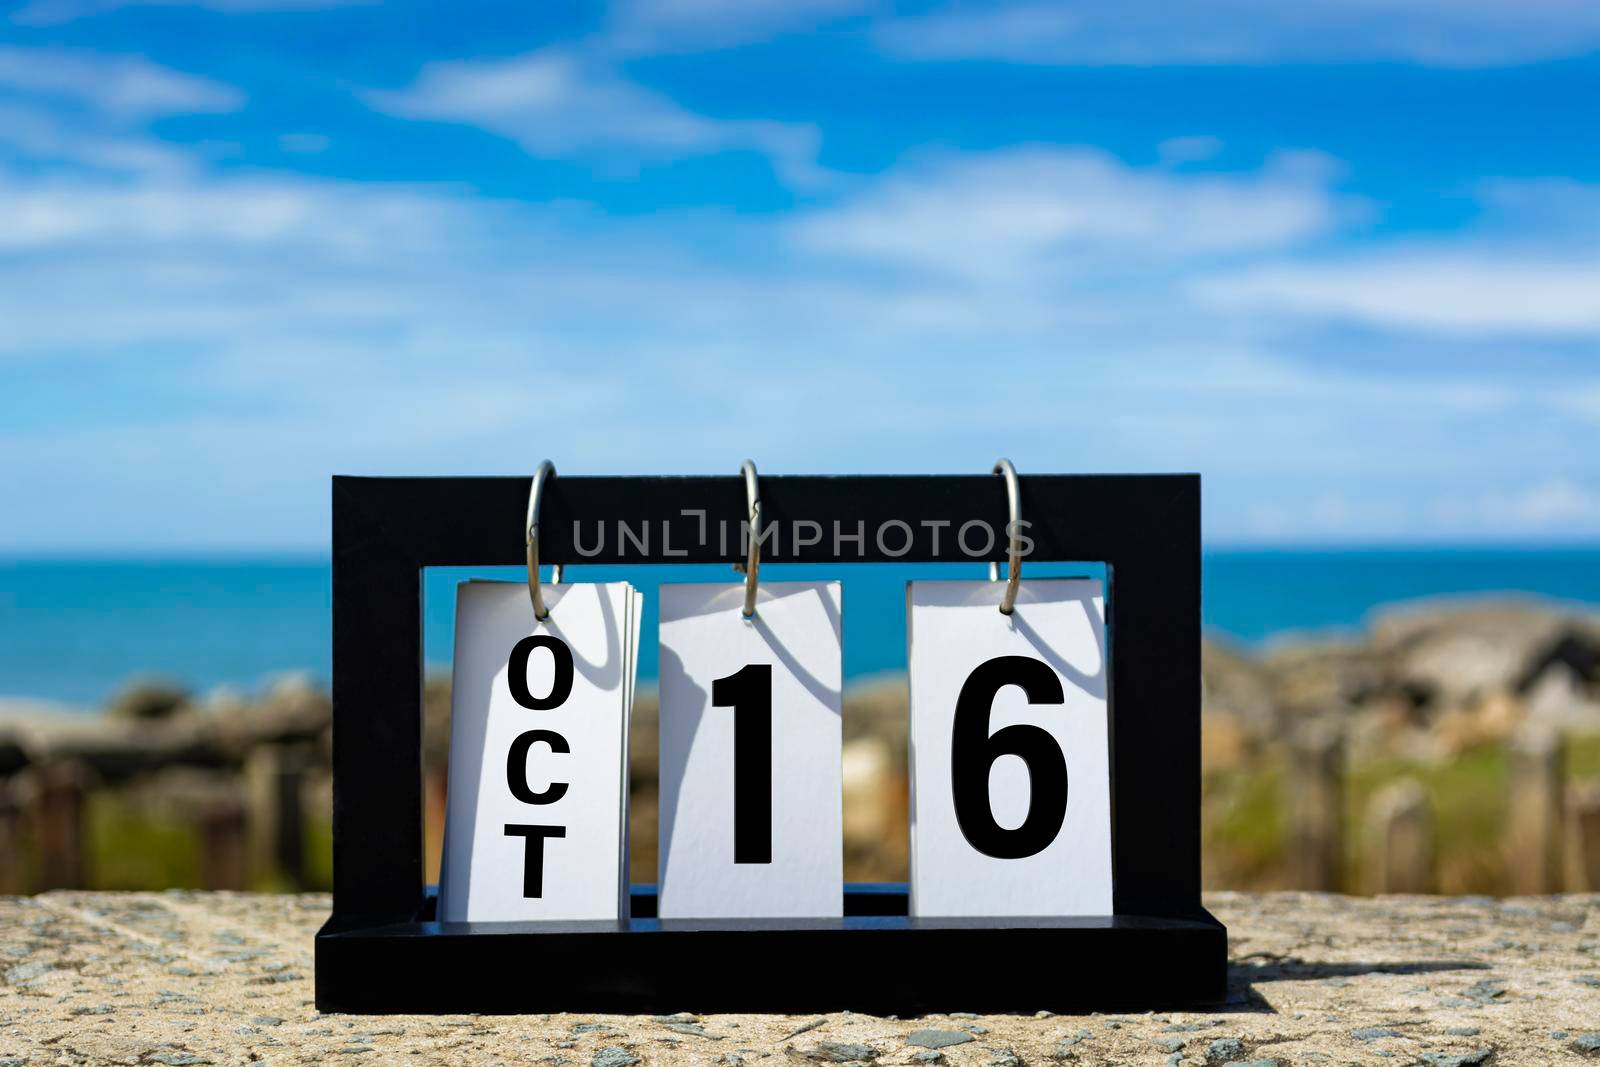 Oct 16 calendar date text on wooden frame with blurred background of ocean. Calendar date concept.